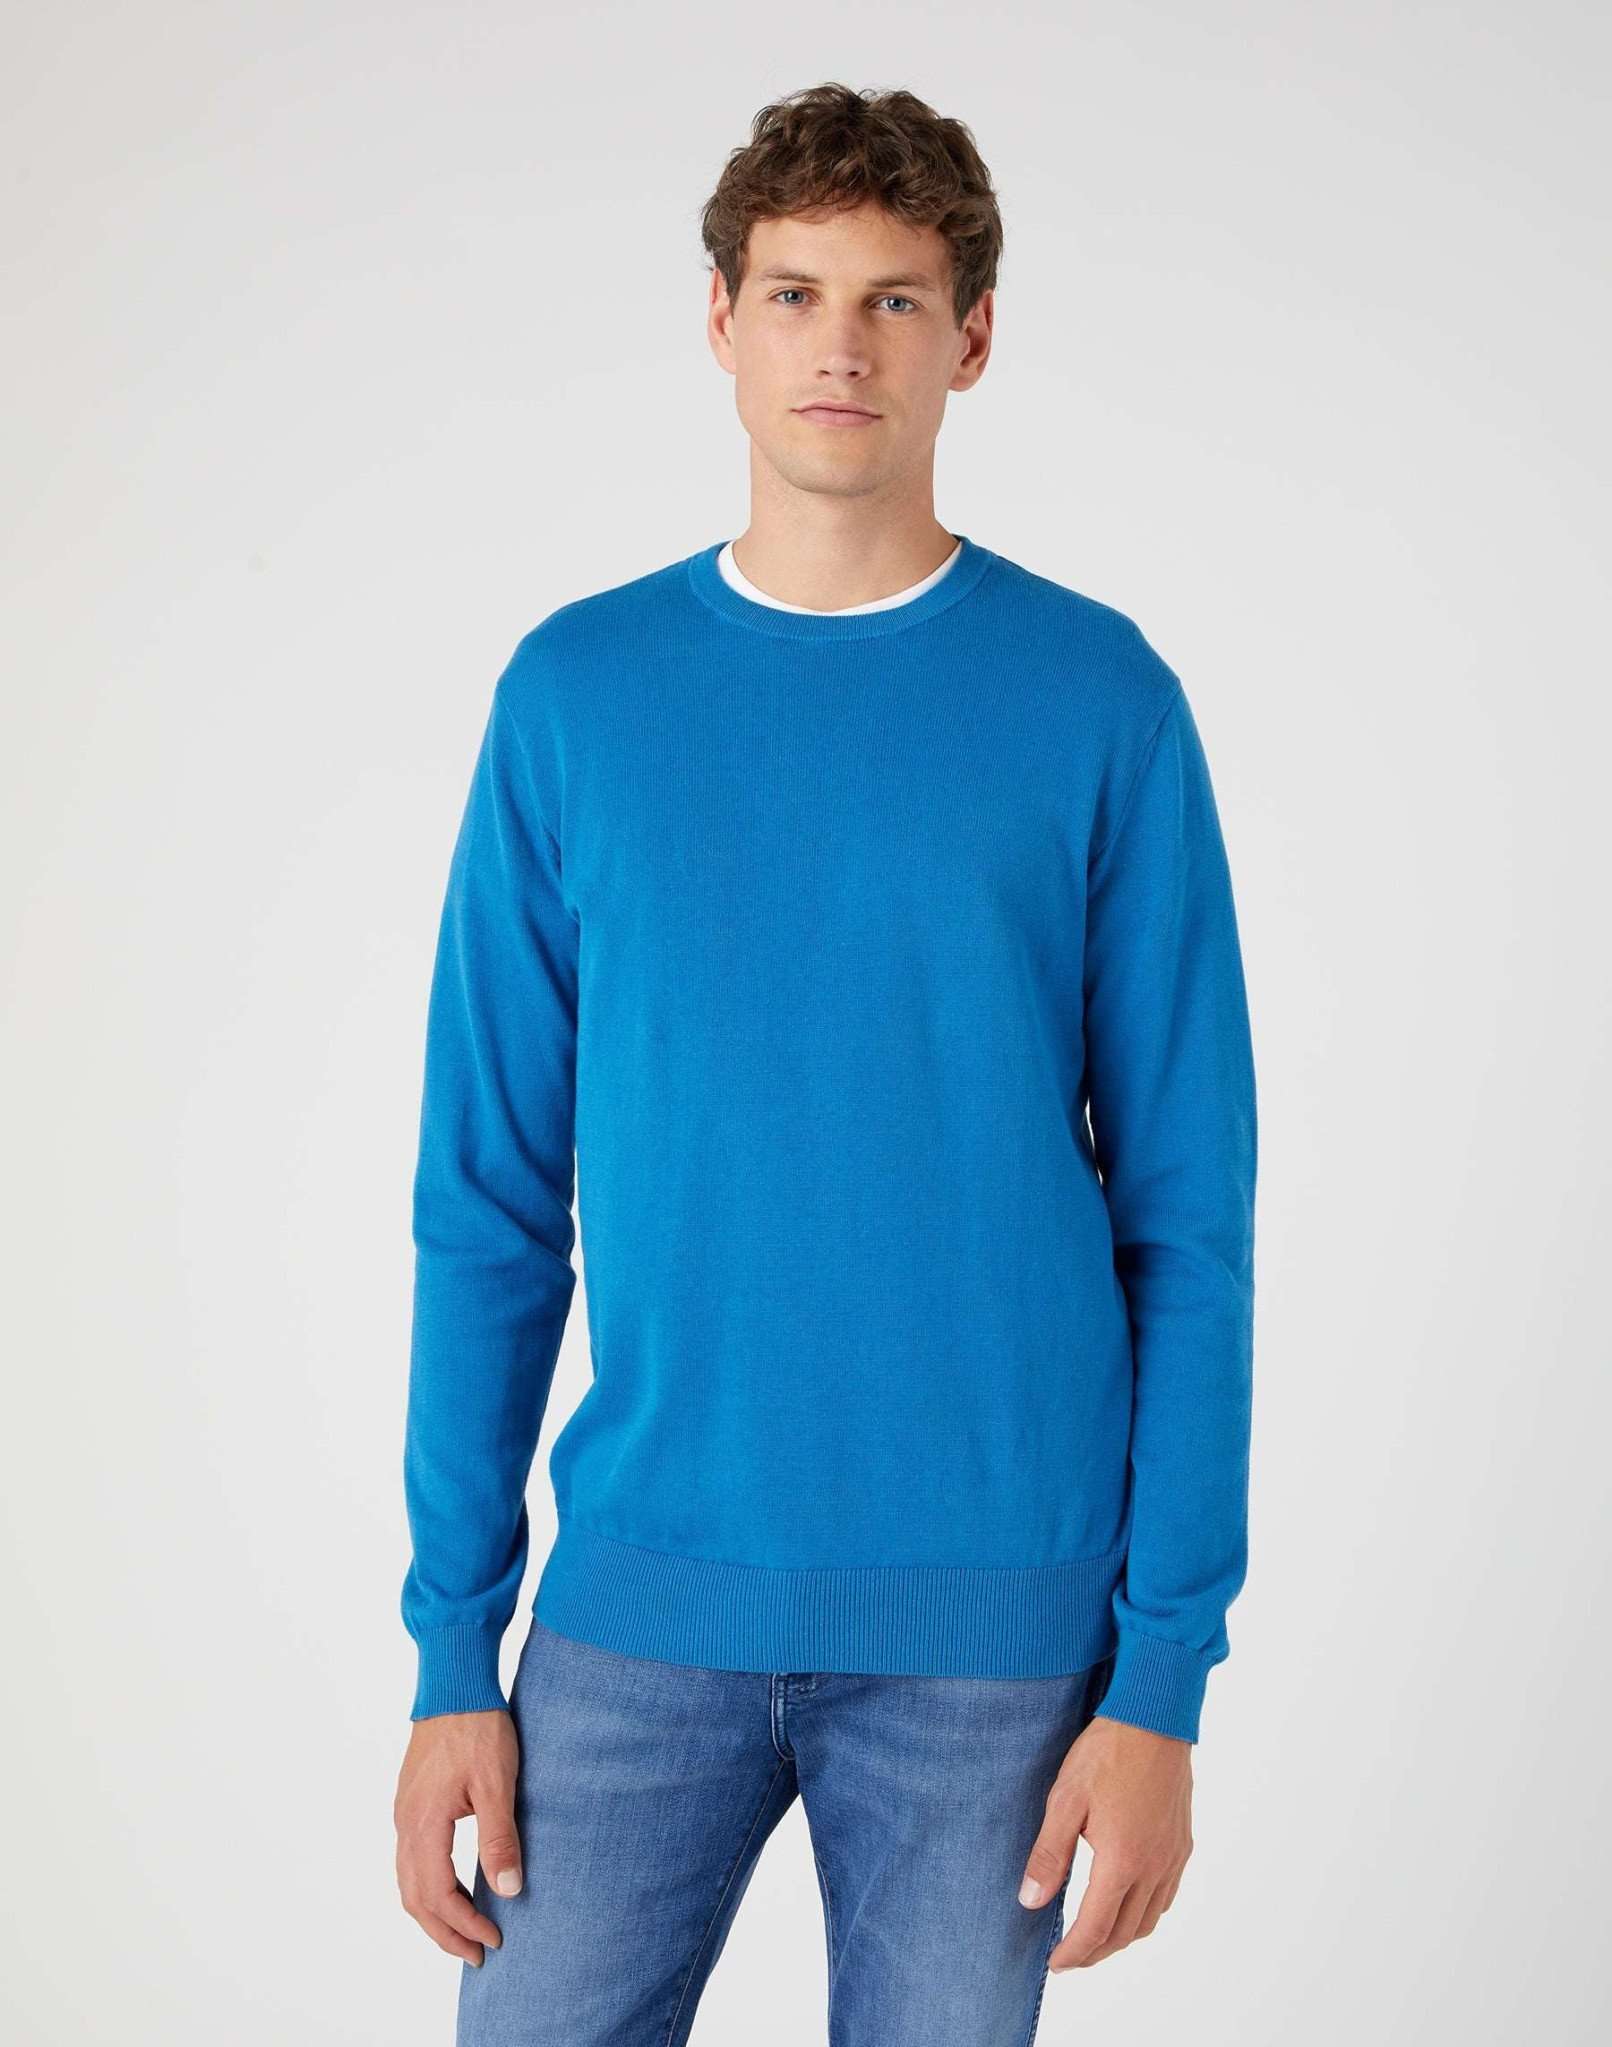 Crewneck Knit in Deep Water Pullover Wrangler   